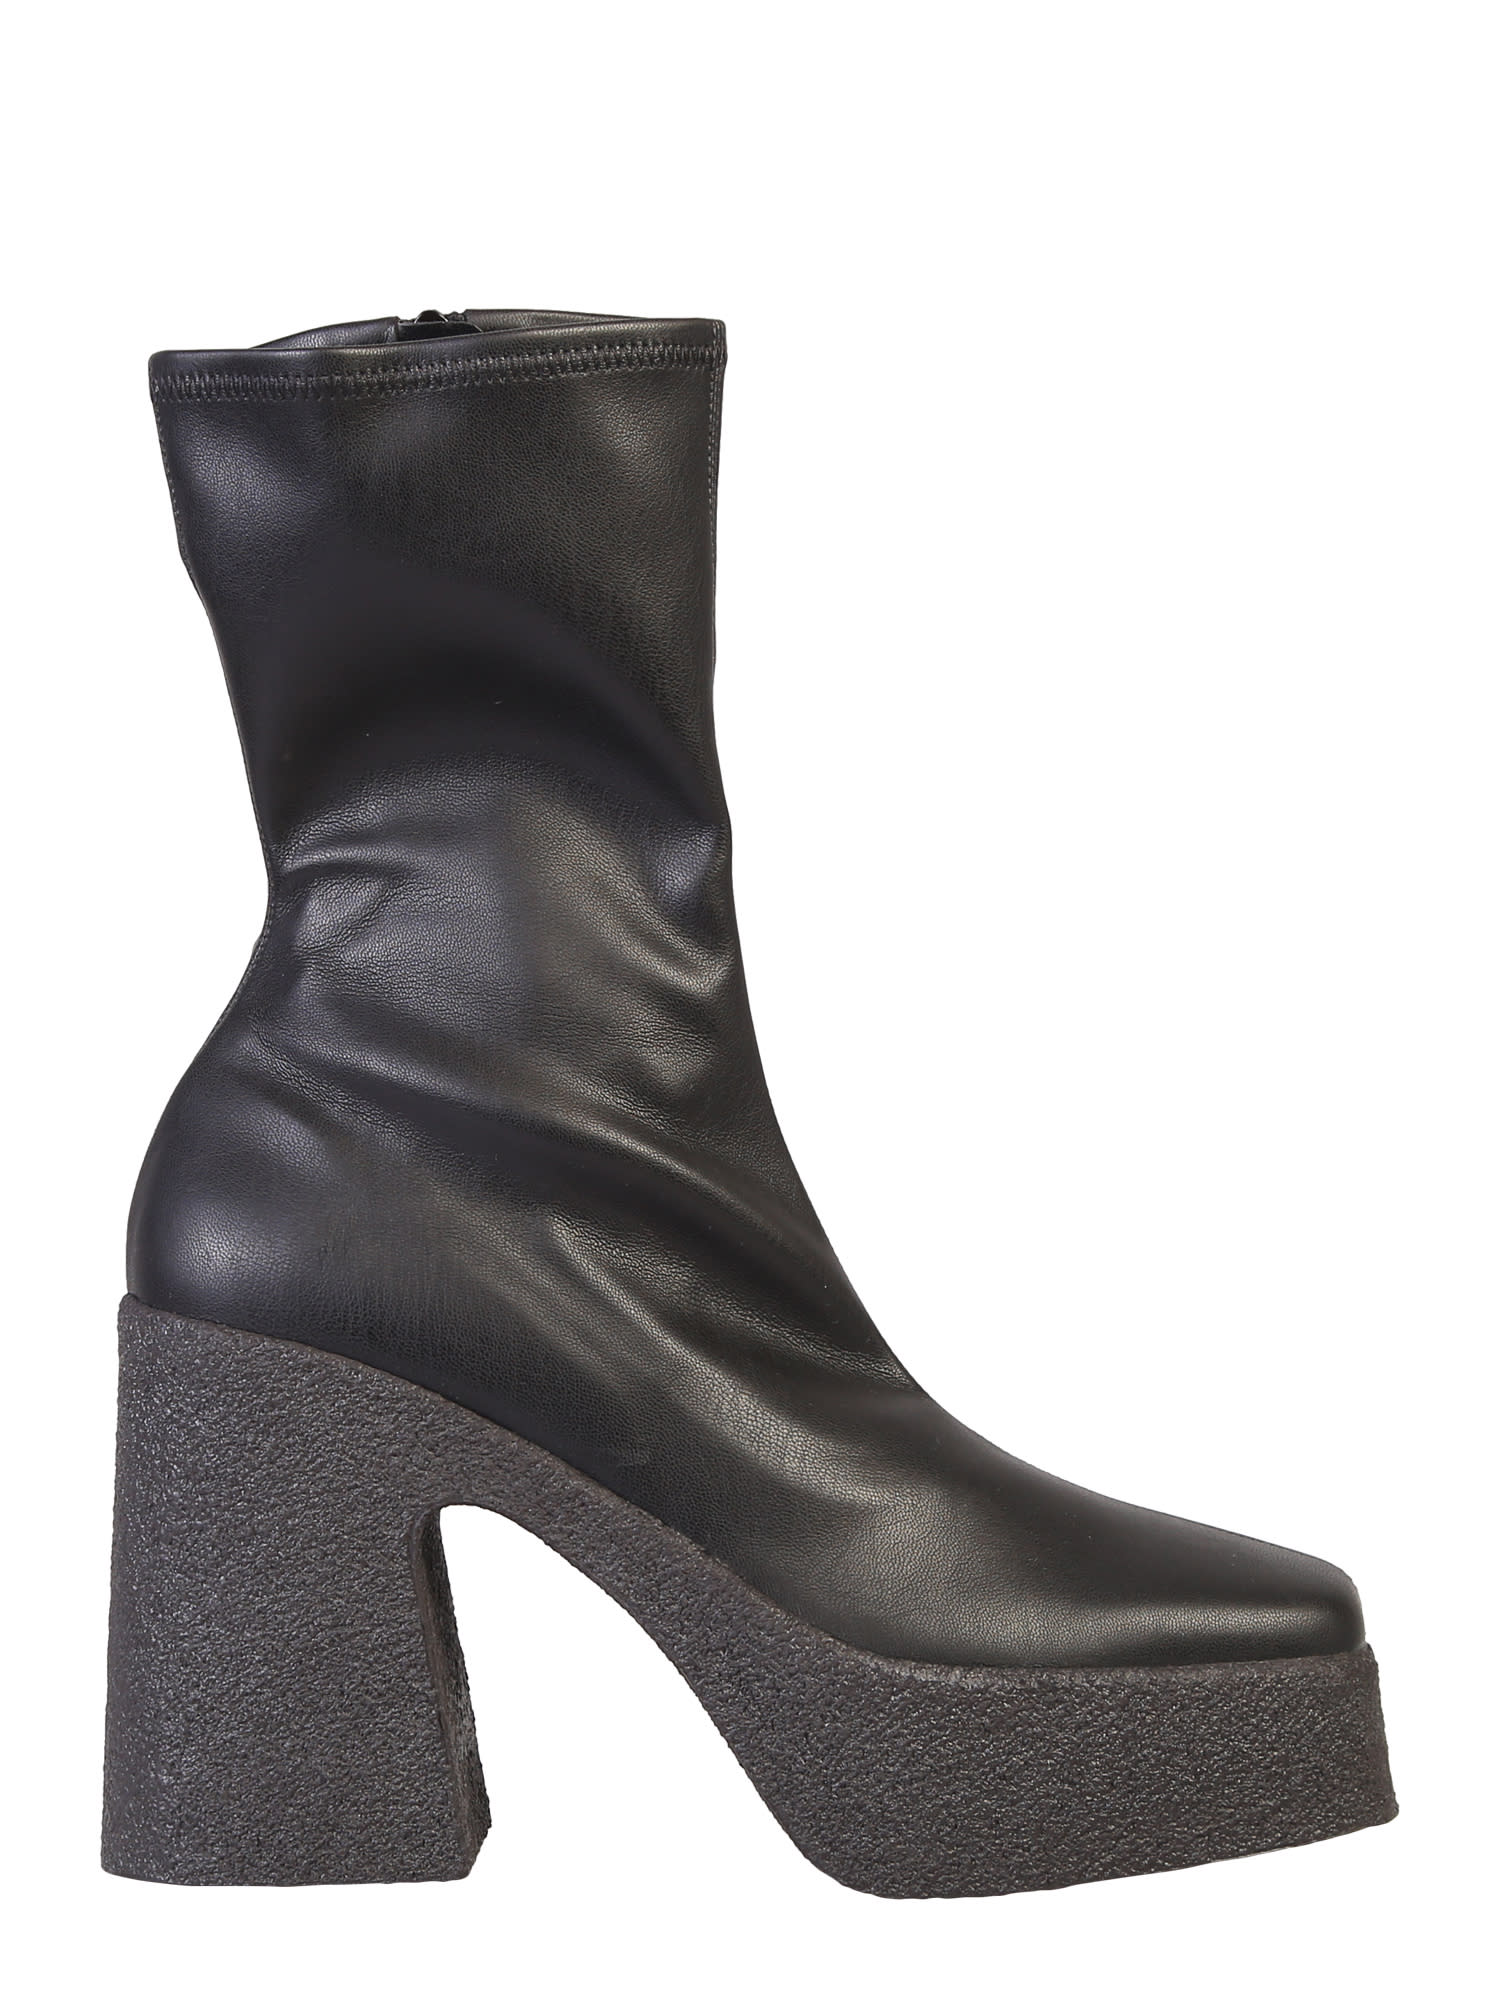 Buy Stella McCartney Black Boots online, shop Stella McCartney shoes with free shipping